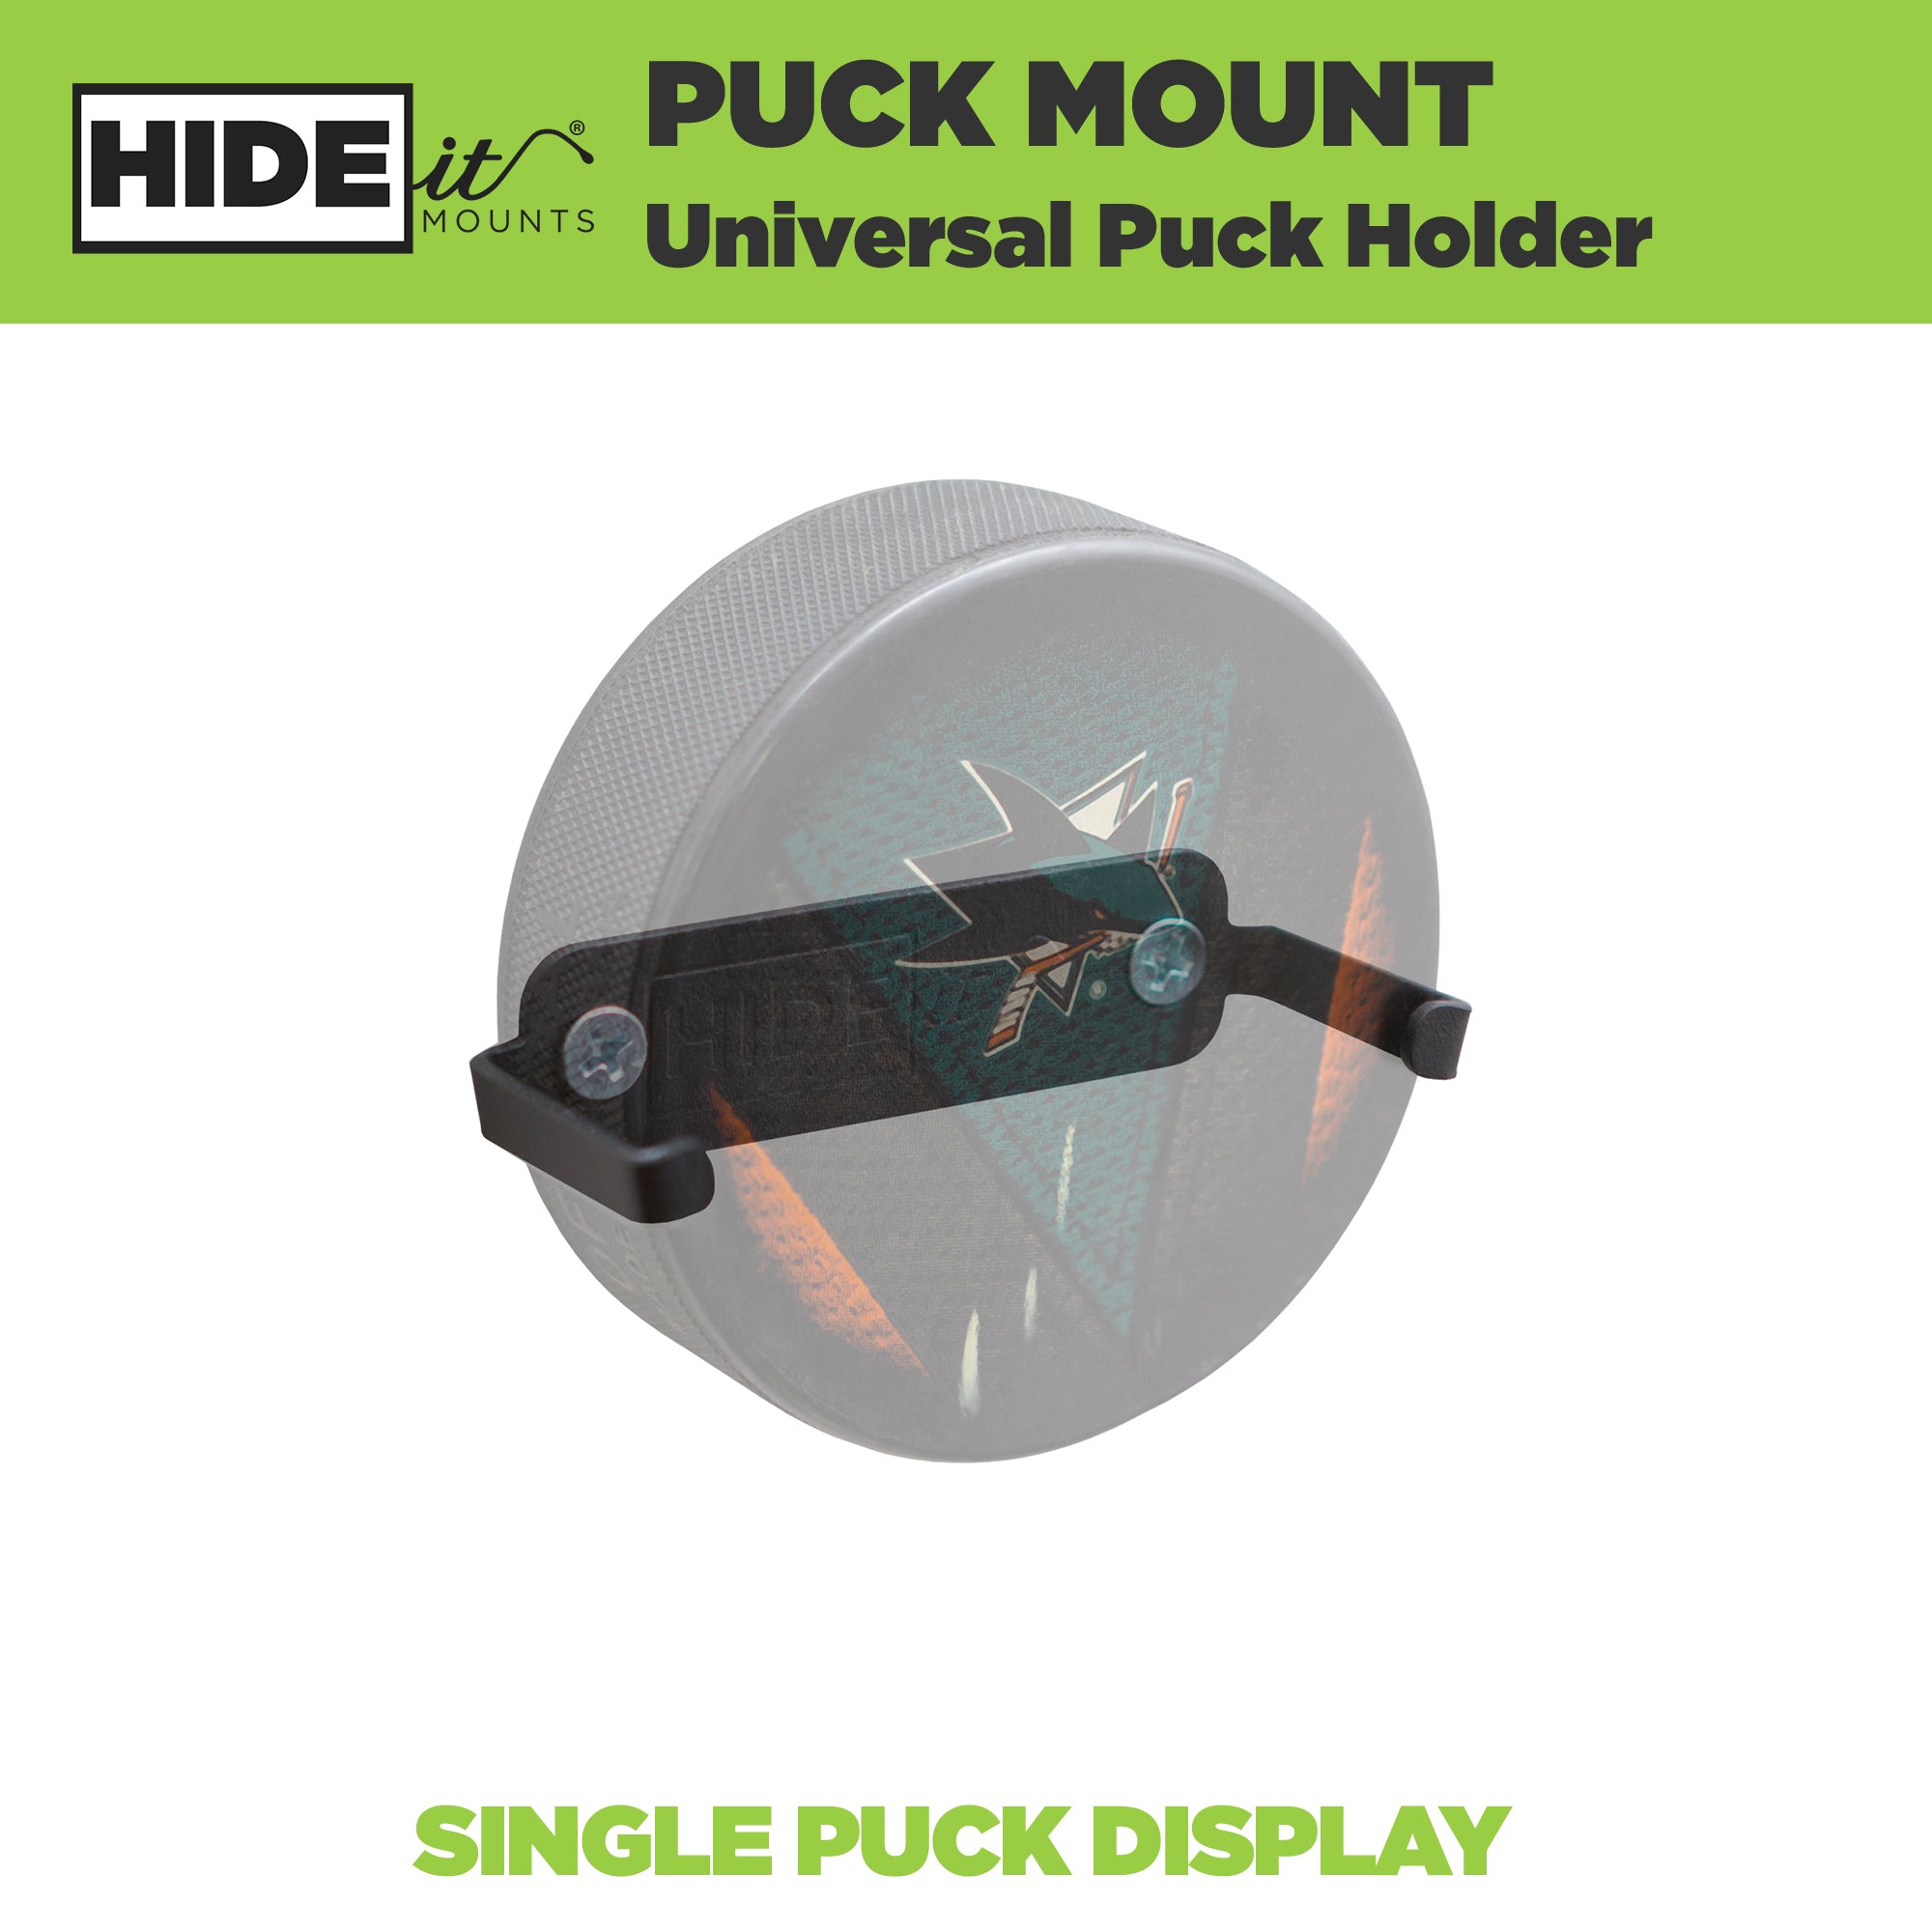 2. HIDEit Mounts Puck universal hockey puck holder product image with ghosted hockey puck.